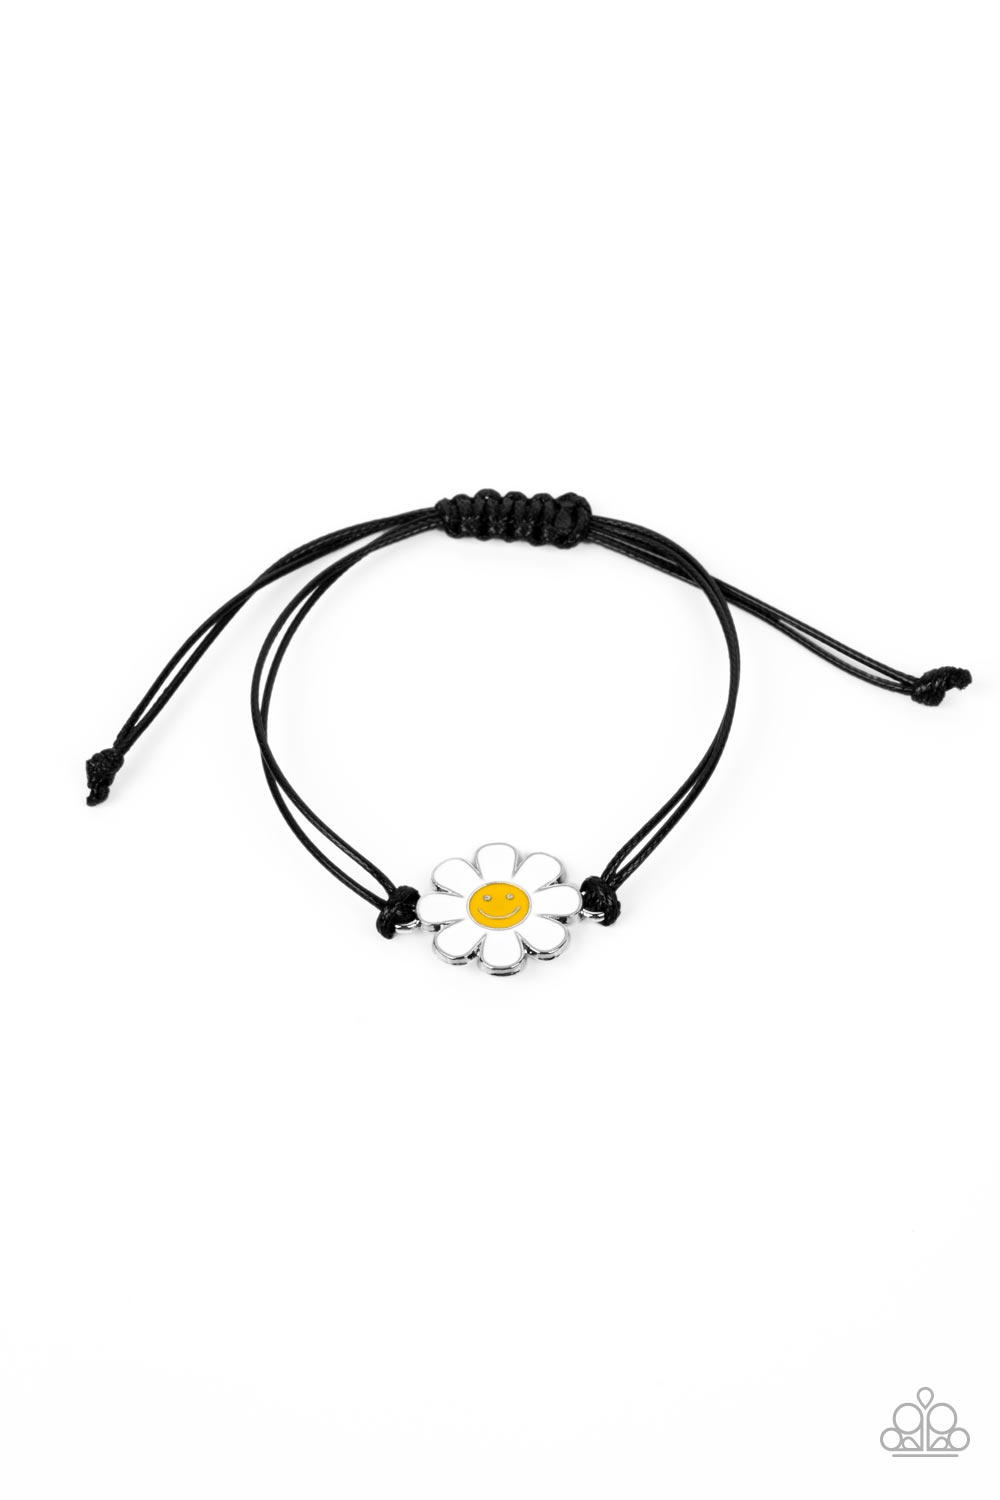 DAISY Little Thing - Black Floral Bracelet - Paparazzi Accessories - Held together and centered within soft black cording, a single daisy charm rests. Featuring a silver smiley face in its yellow center, this single flower provides a fashionably, minimalistic statement around the wrist.